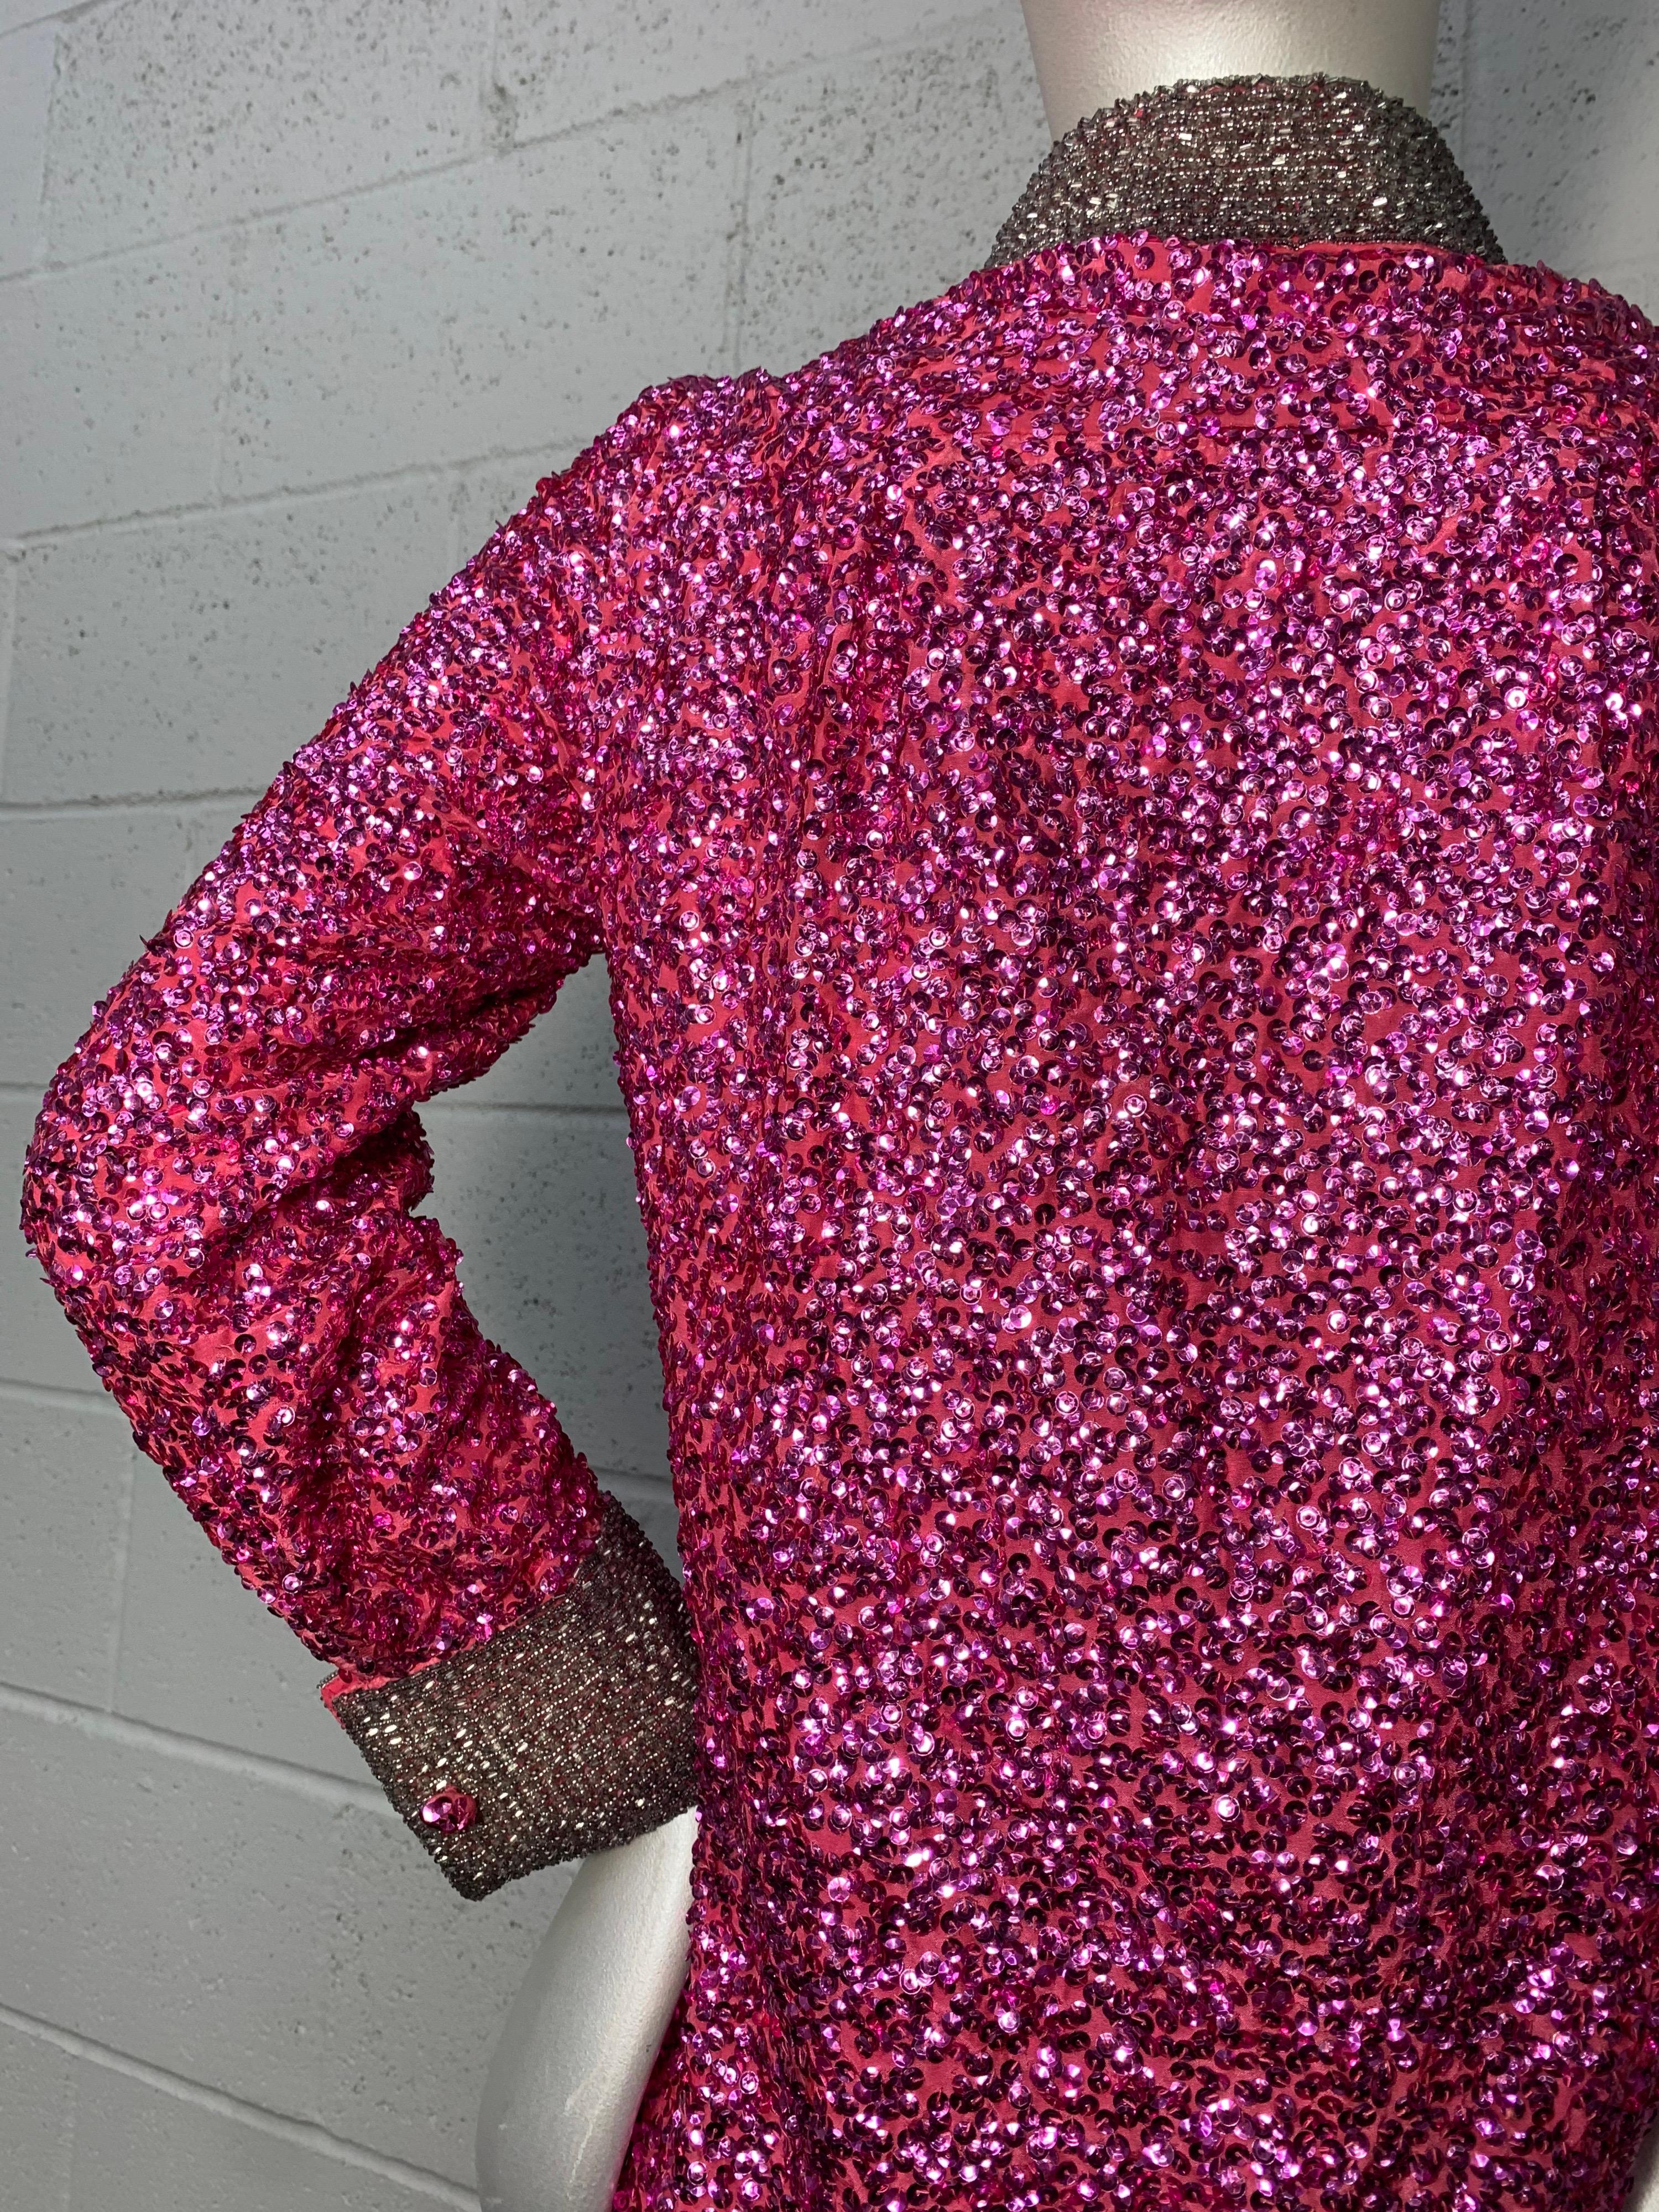 1960s Vivid Fuchsia Sequined Mod Mini Dress w/ Silver Beaded Collar and Cuffs For Sale 4